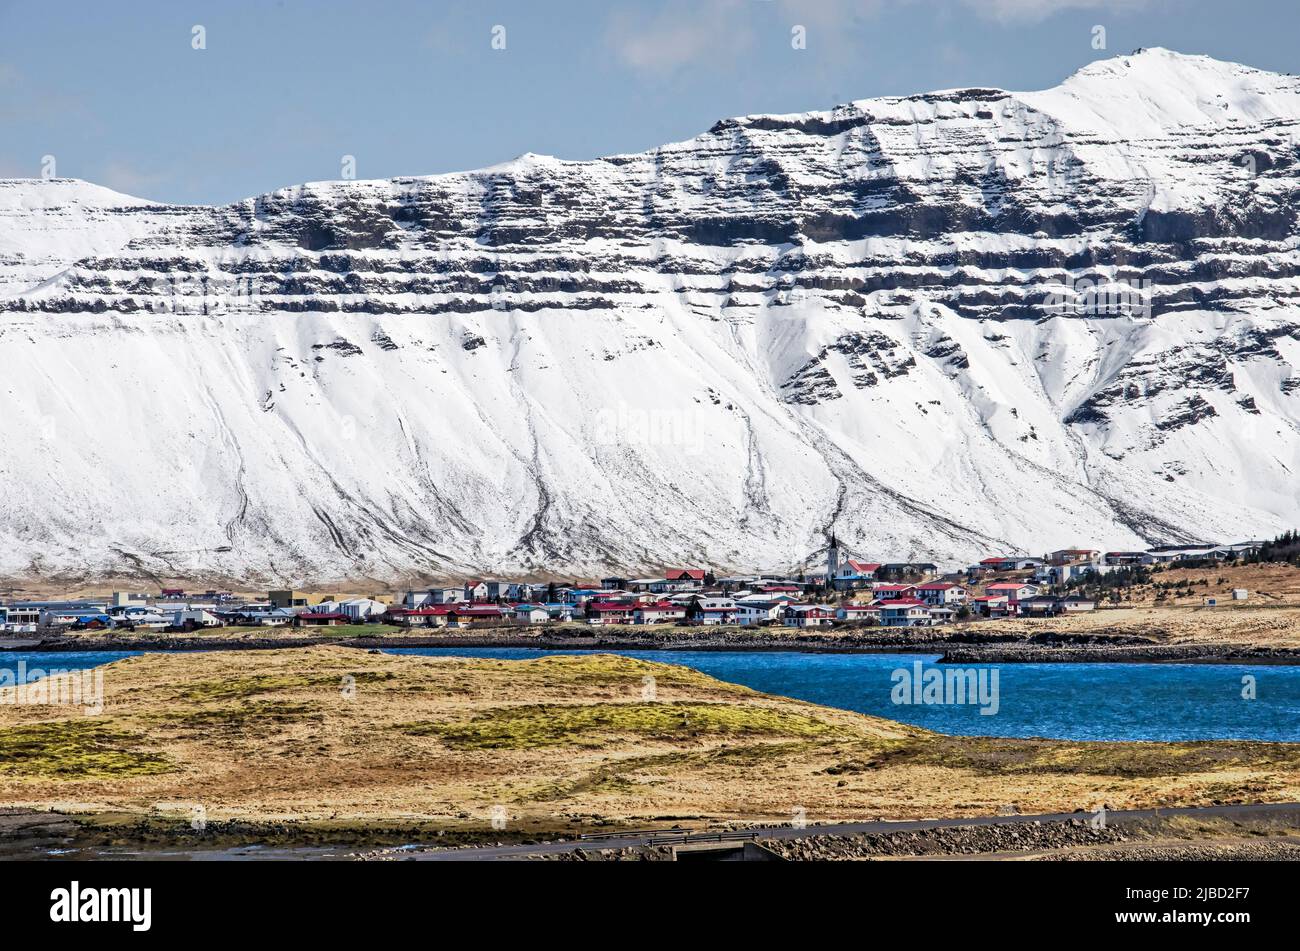 Grundarfjörður, Iceland, May 6, 2022: view across hills and bodies of water towards the town against a spectacular backdrop of snow-covered mountain s Stock Photo